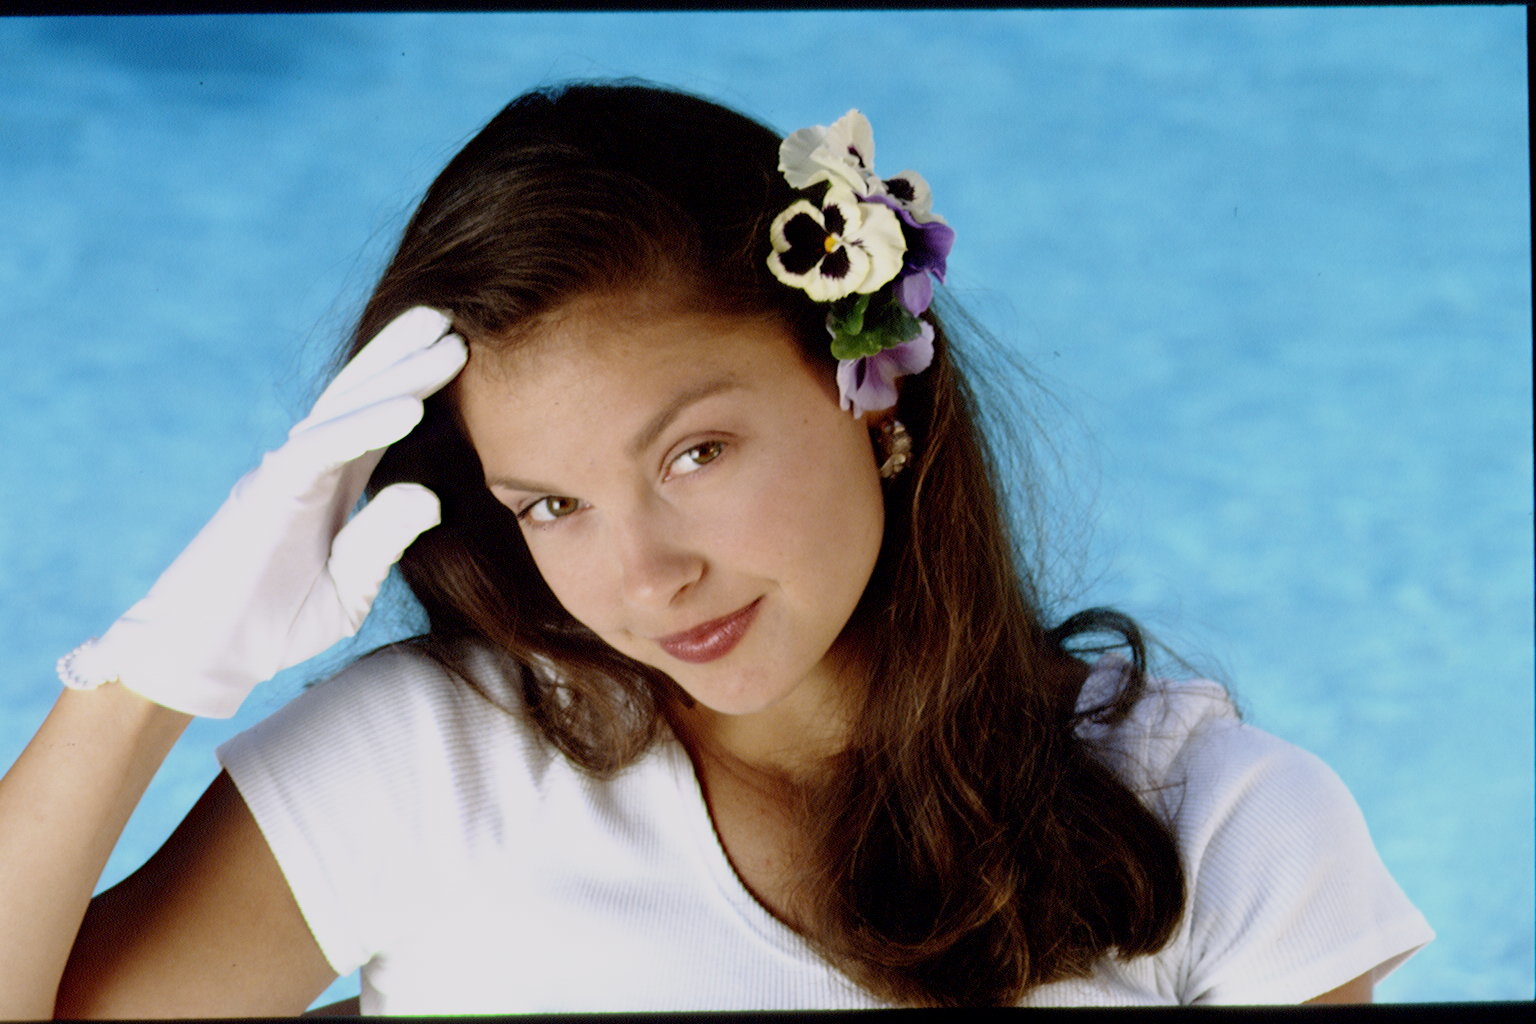 Ashley Judd at the 46th Cannes Film Festival on May 17, 1993. | Source: Getty Images